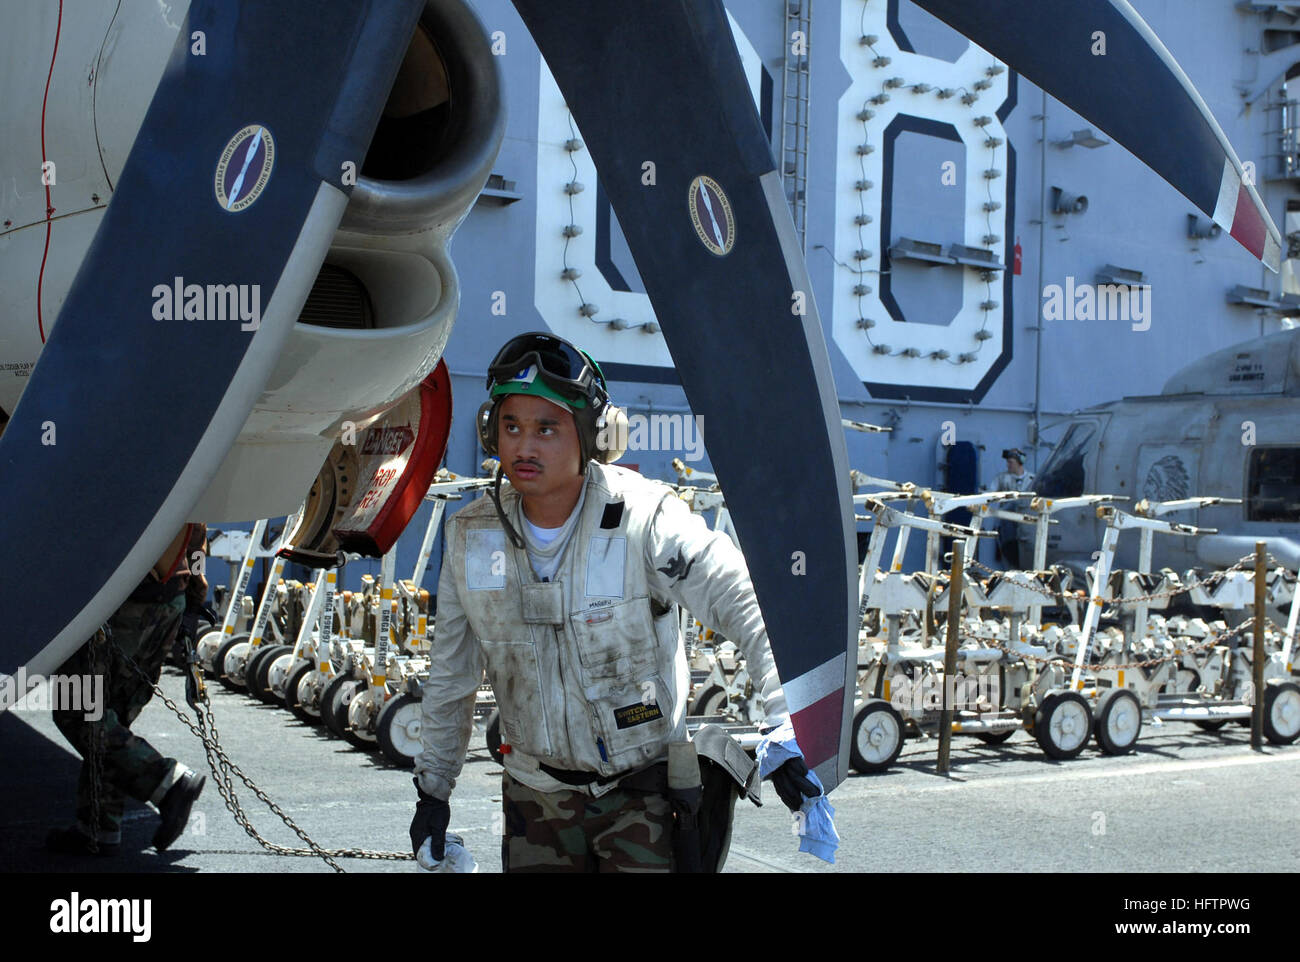 070605-N-3349L-017 PERSIAN GULF (June 5, 2007) - Aviation Machinist's Mate 3rd Class Mikhos Manero, assigned to the 'Wallbangers' of Carrier Airborne Early Warning Squadron (VAW) 117, inspects the propellers on a preflight inspection aboard the nuclear-powered aircraft carrier USS Nimitz (CVN 68). The Nimitz Carrier Strike Group and embarked Carrier Air Wing (CVW) 11 are deployed in the U.S. 5th Fleet conducting maritime operations supporting troops in the global war on terrorism. U.S. Navy photo by Mass Communication specialist 2nd Class Daniel P. Lapierre (RELEASED) US Navy 070605-N-3349L-01 Stock Photo